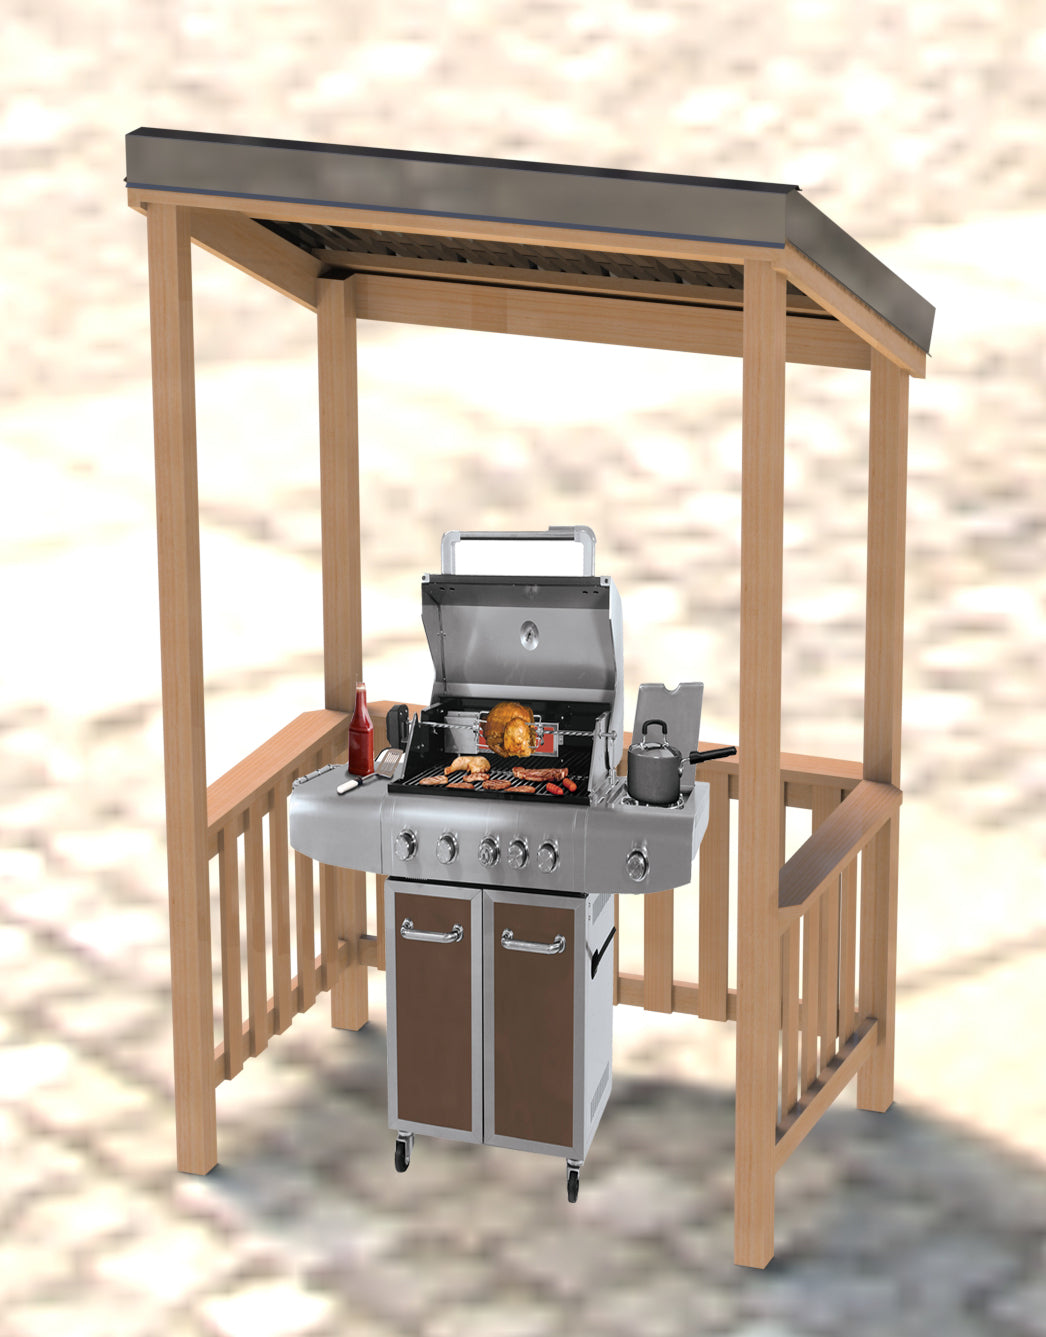 4' x 6' Grill Shelter Step by Step Building Plans